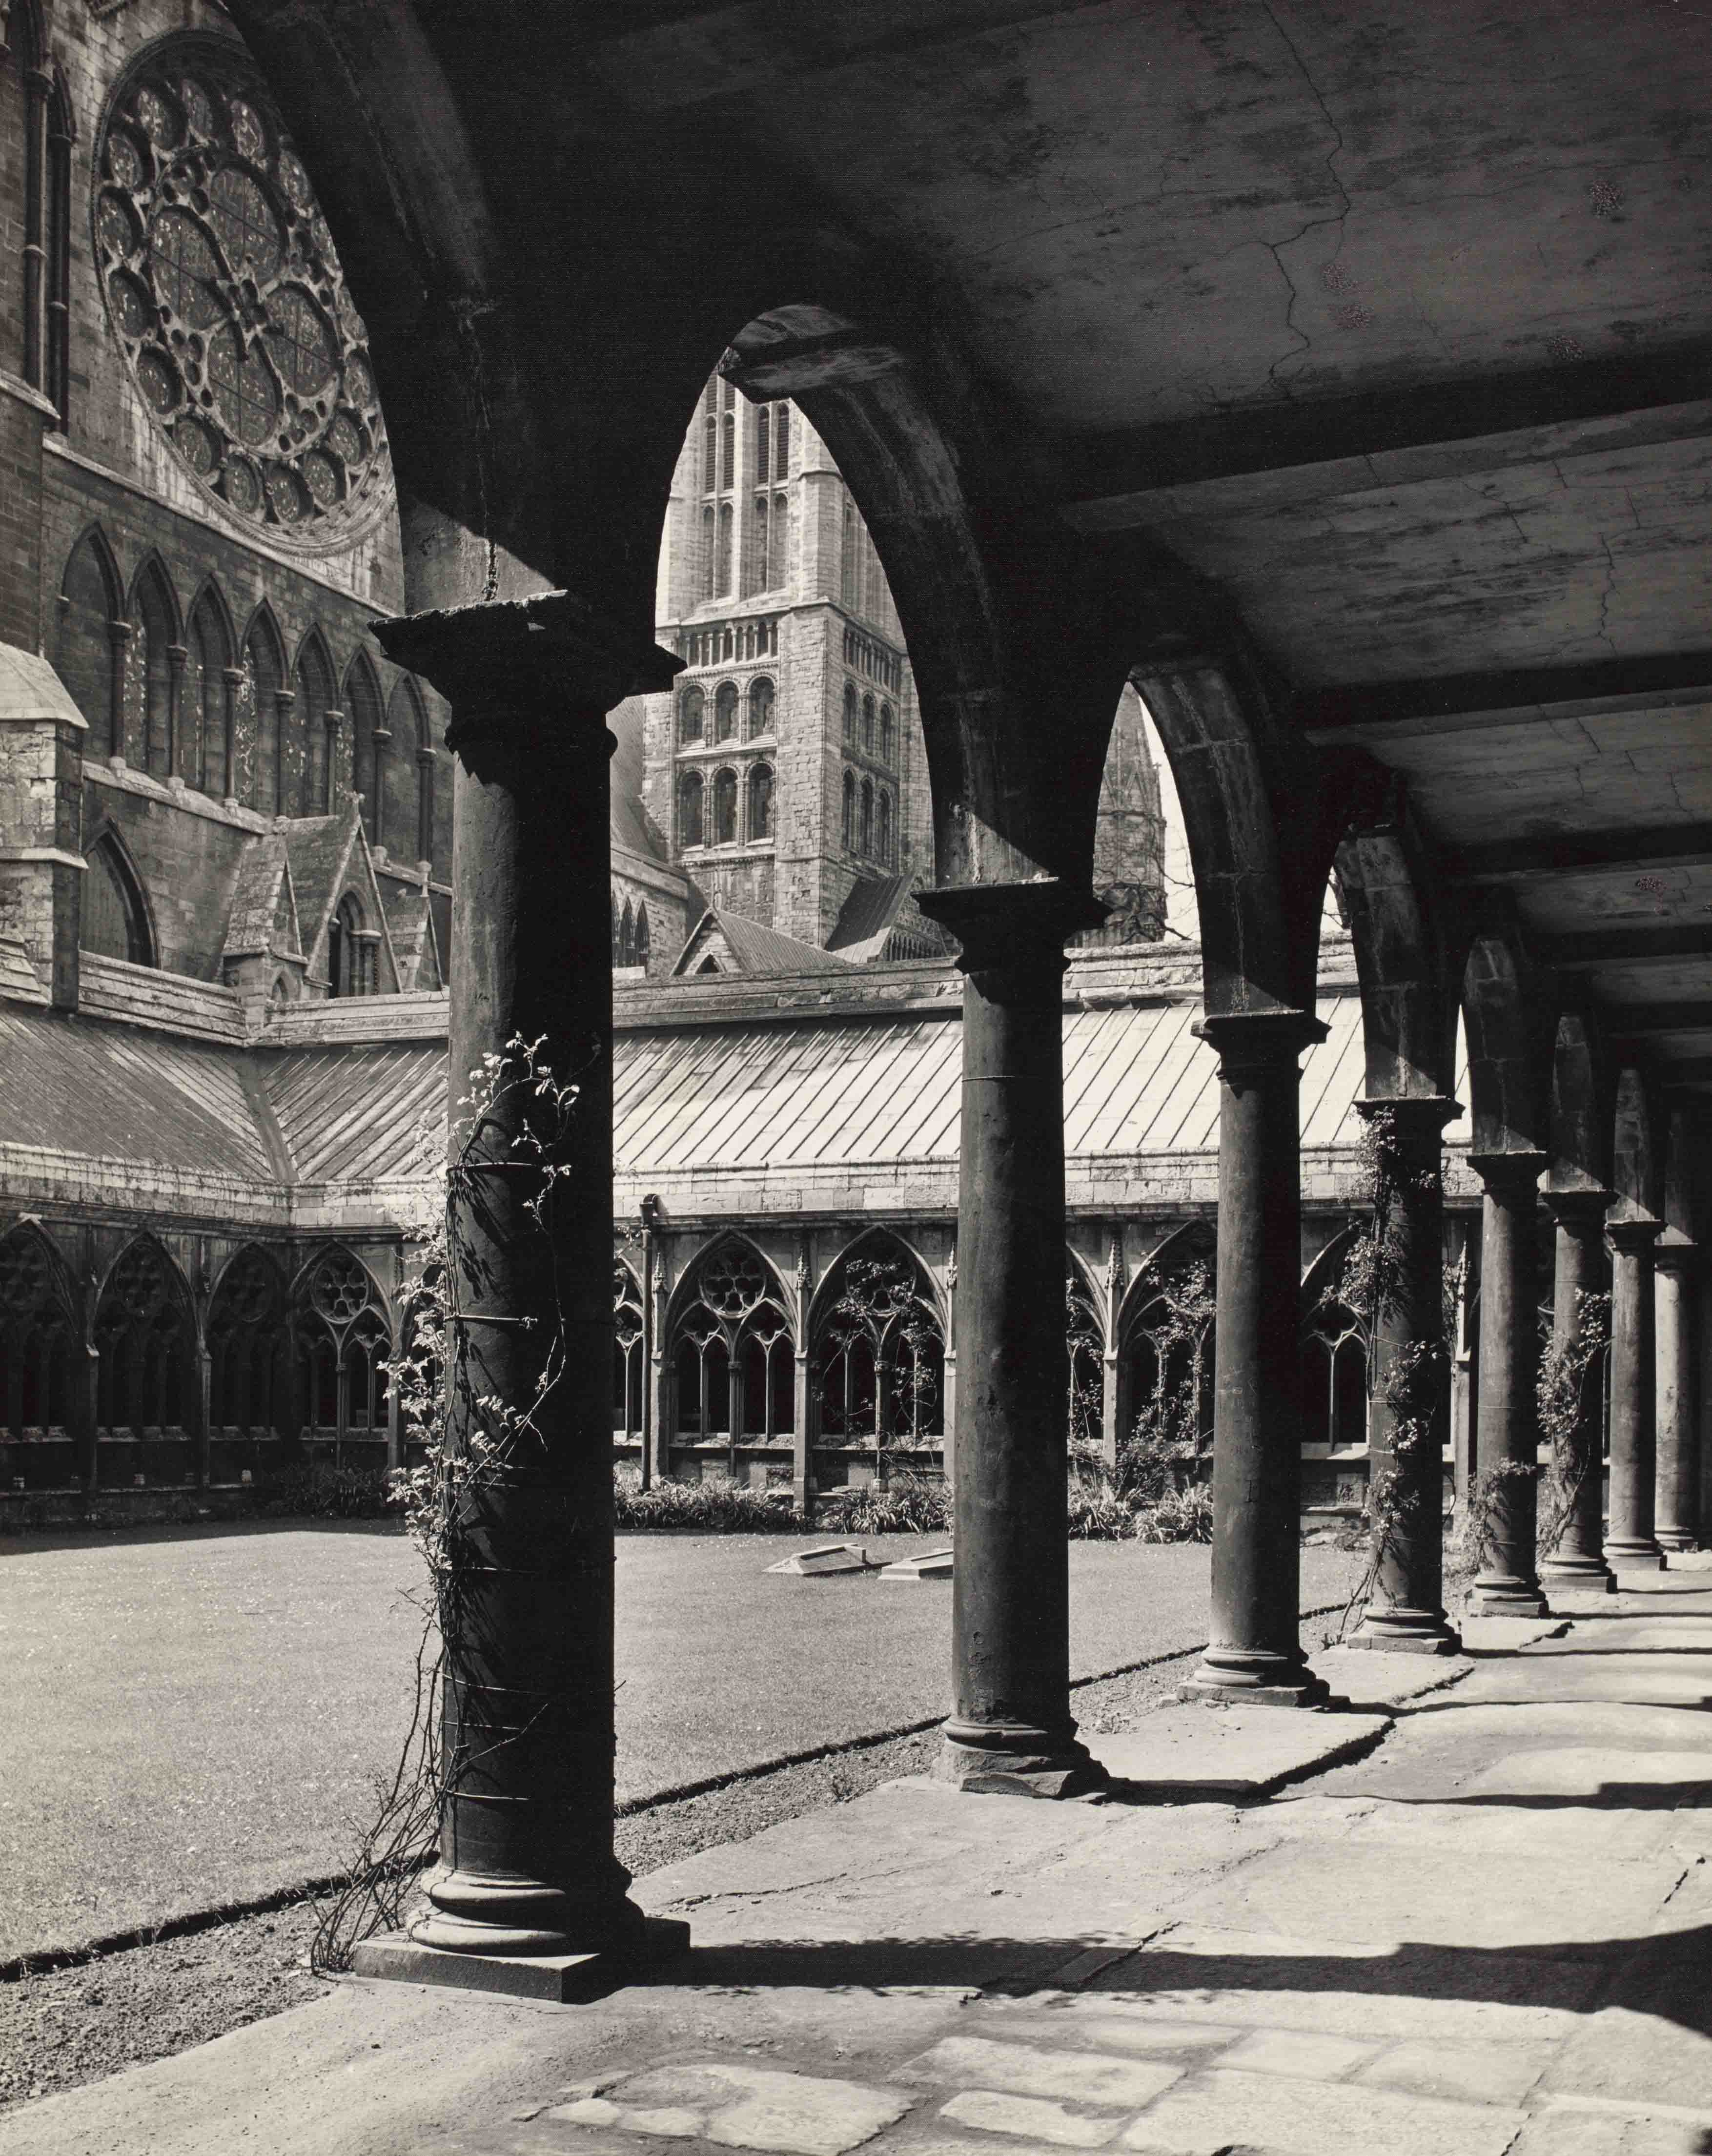 The cloisters at Lincoln Cathedral